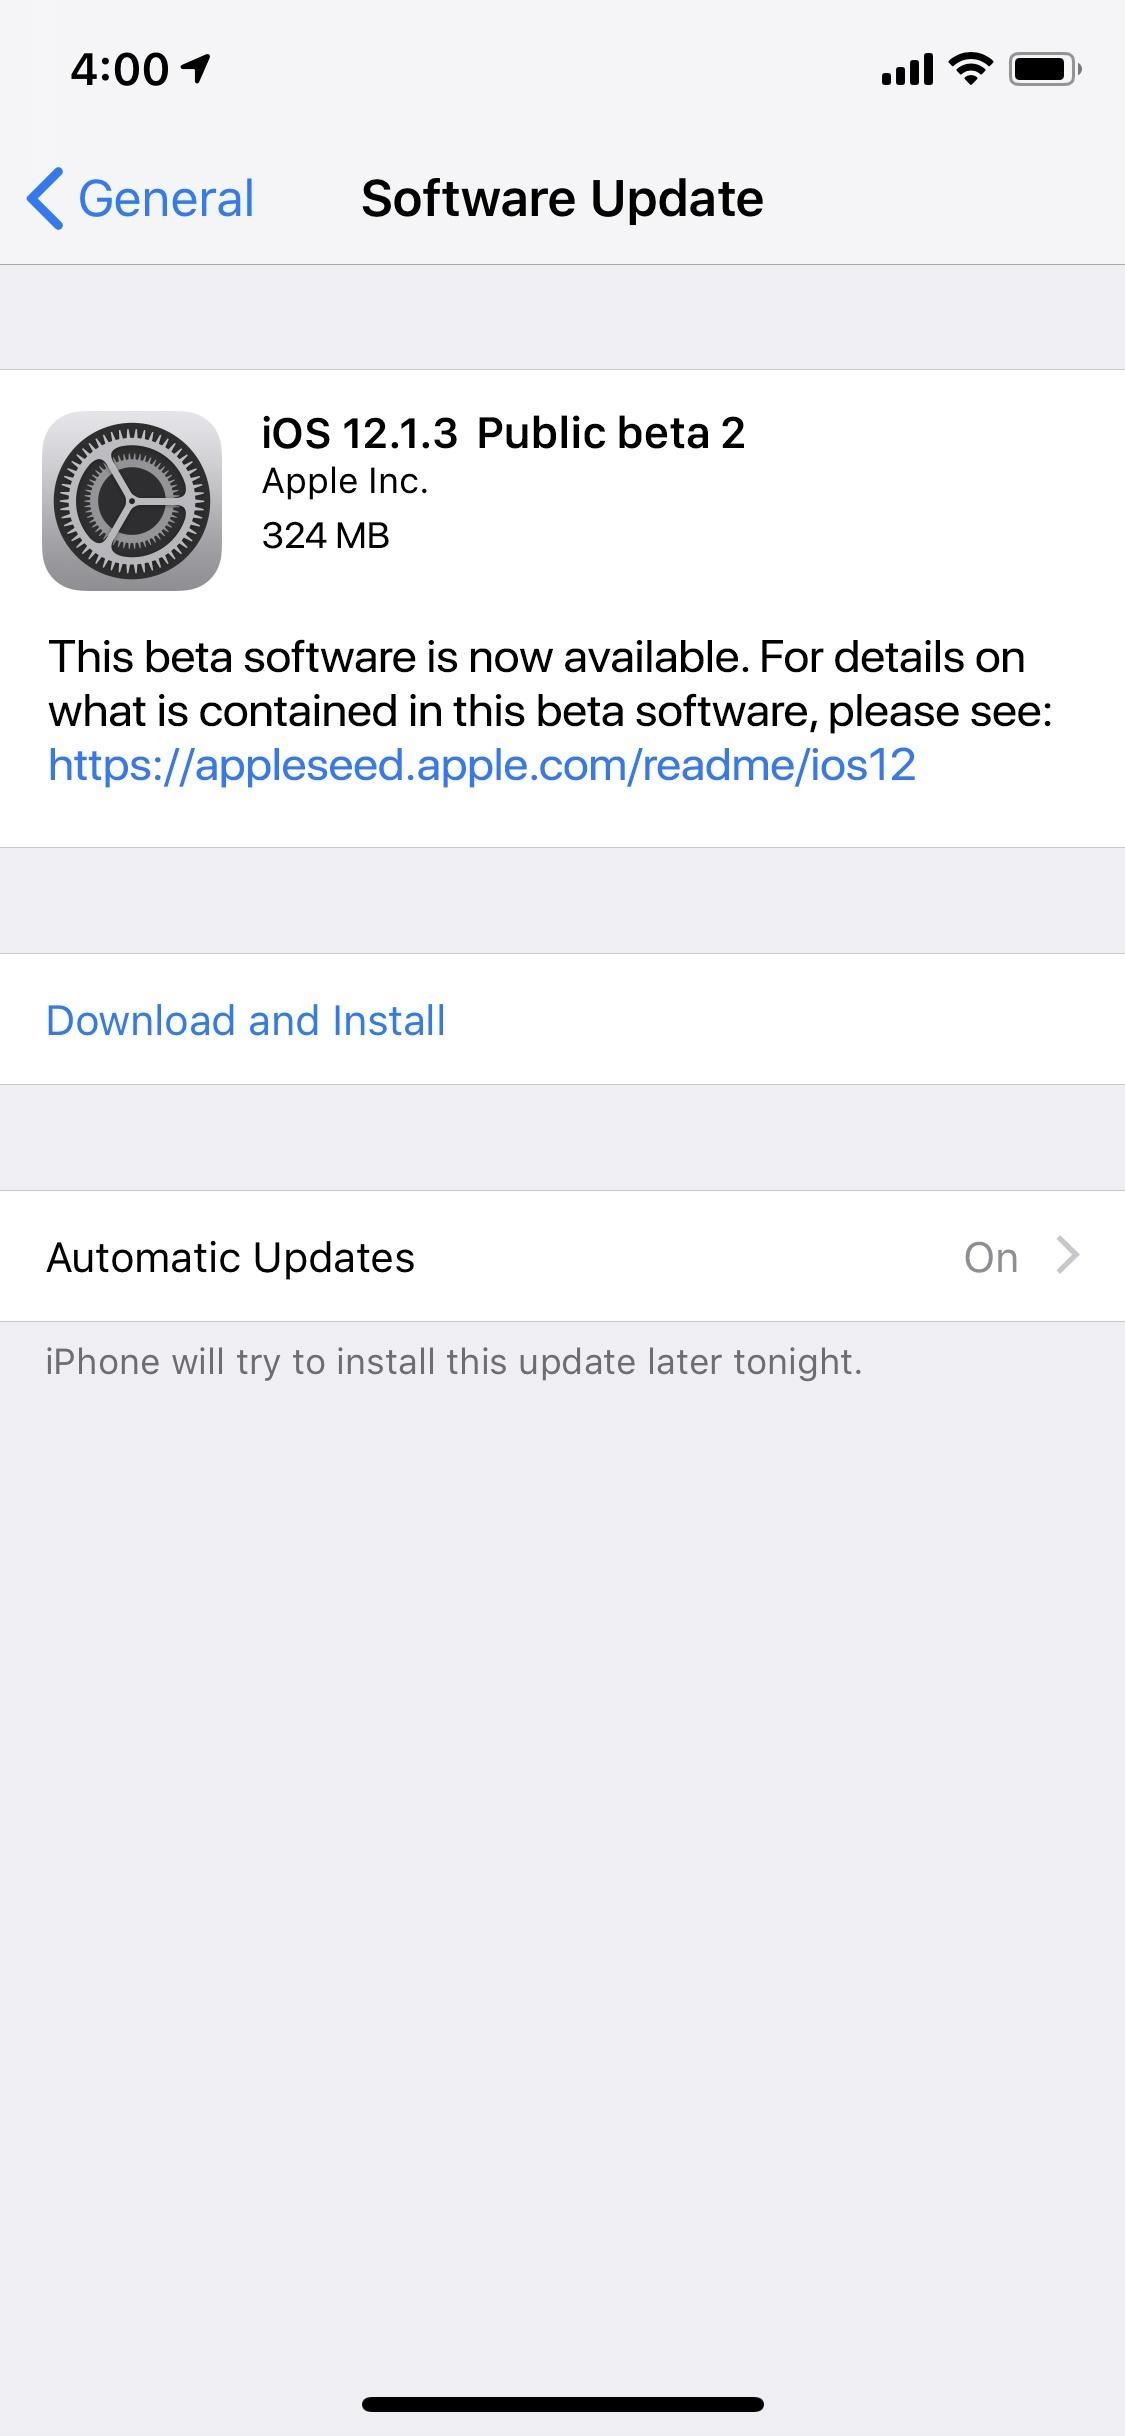 Apple's iOS 12.1.3 Public Beta 2 for iPhone Released to Software Testers